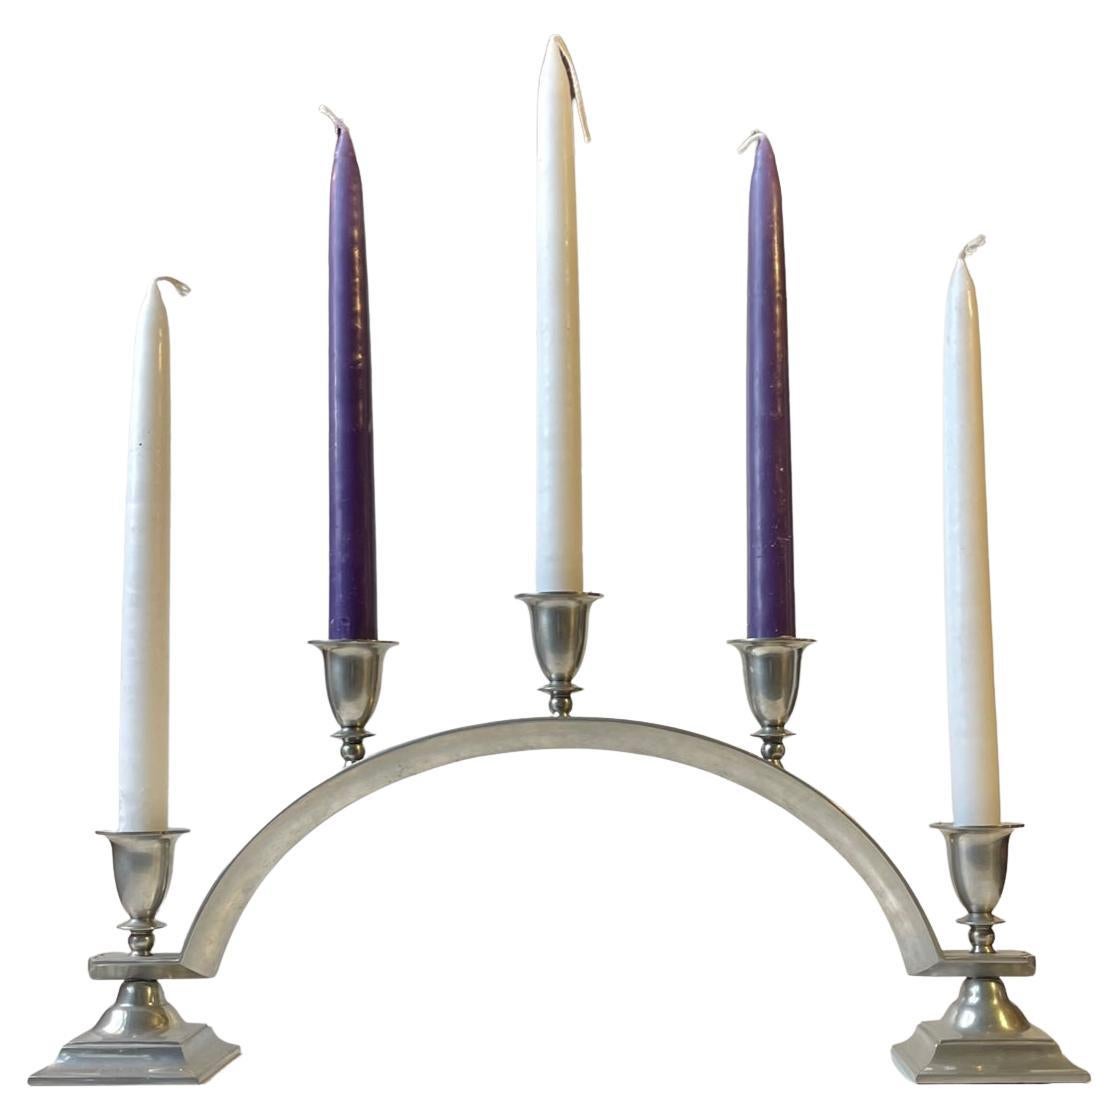 Just Andersen Arched Art Deco Candelabra in Pewter, 1940s For Sale